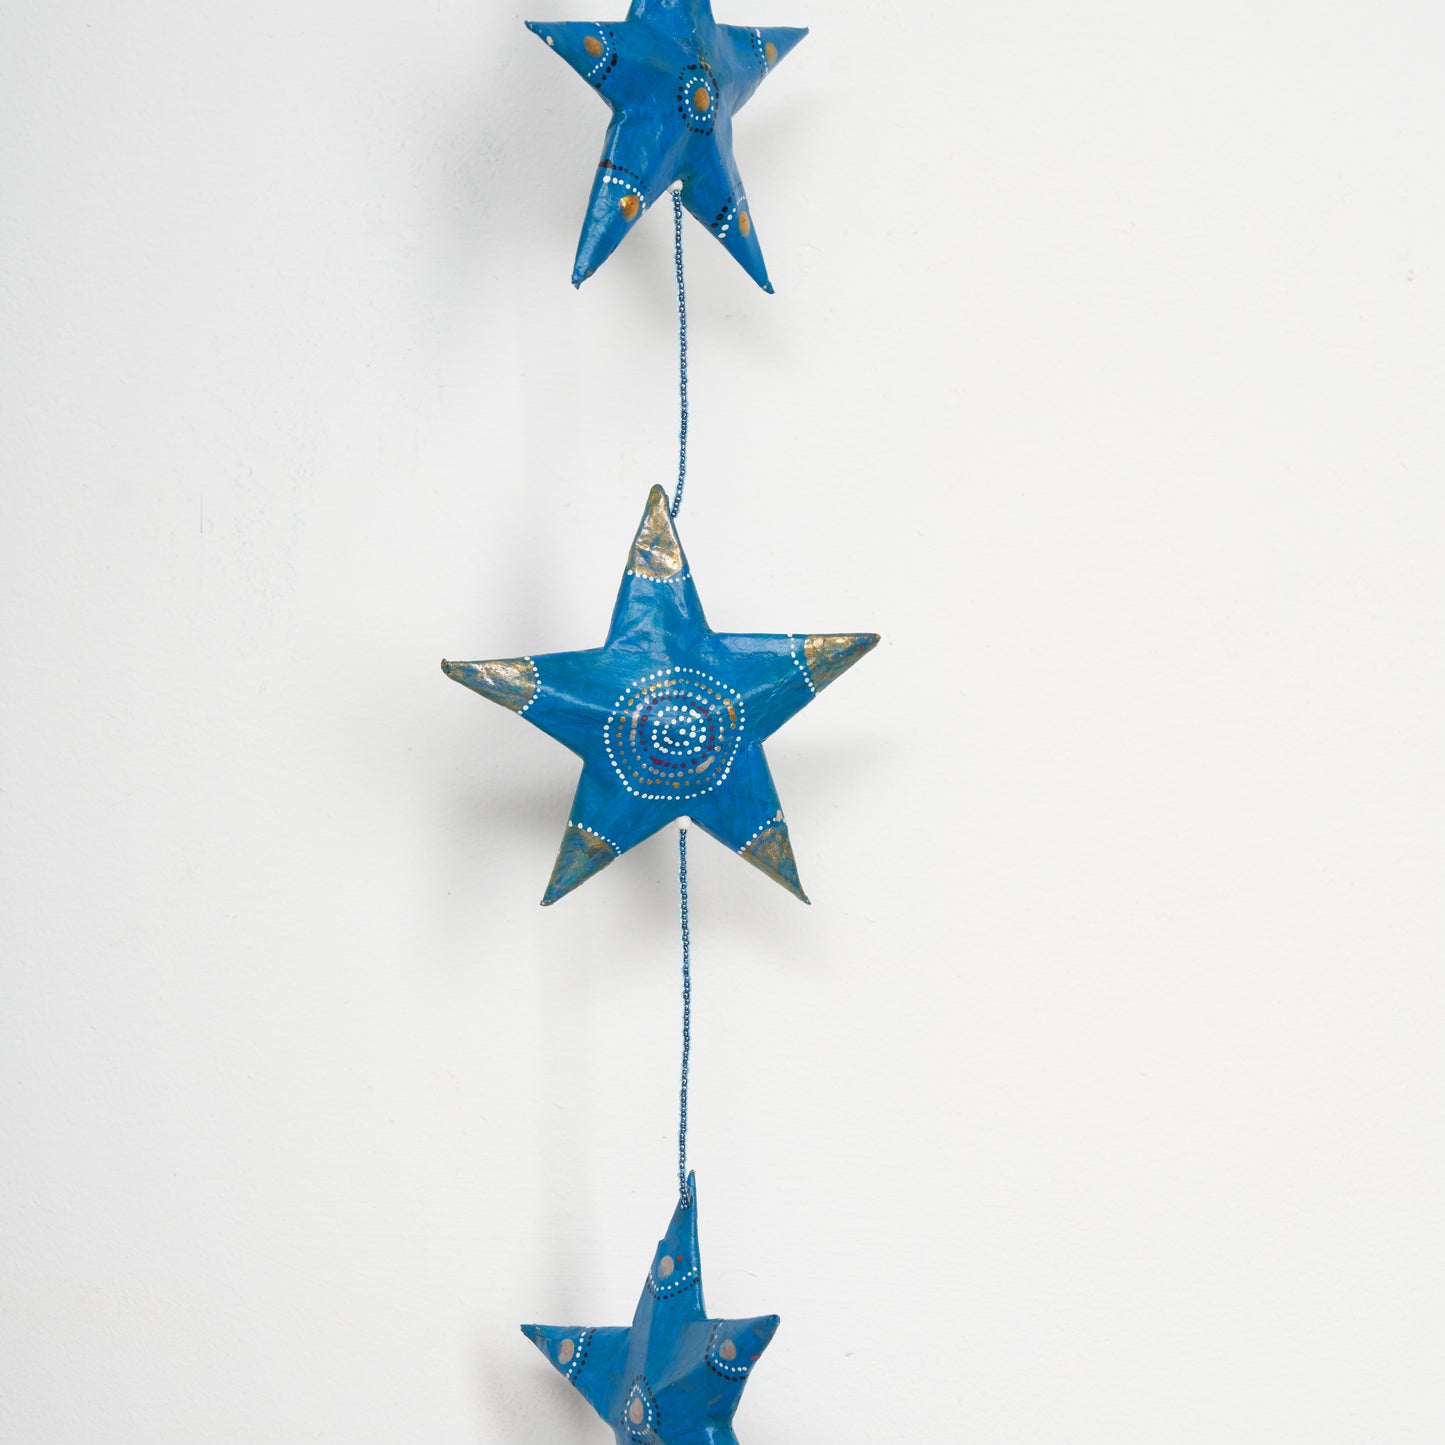 Garland / Mobilé "Stars" made of papier-mâché from recycled paper | Upcycling, handmade